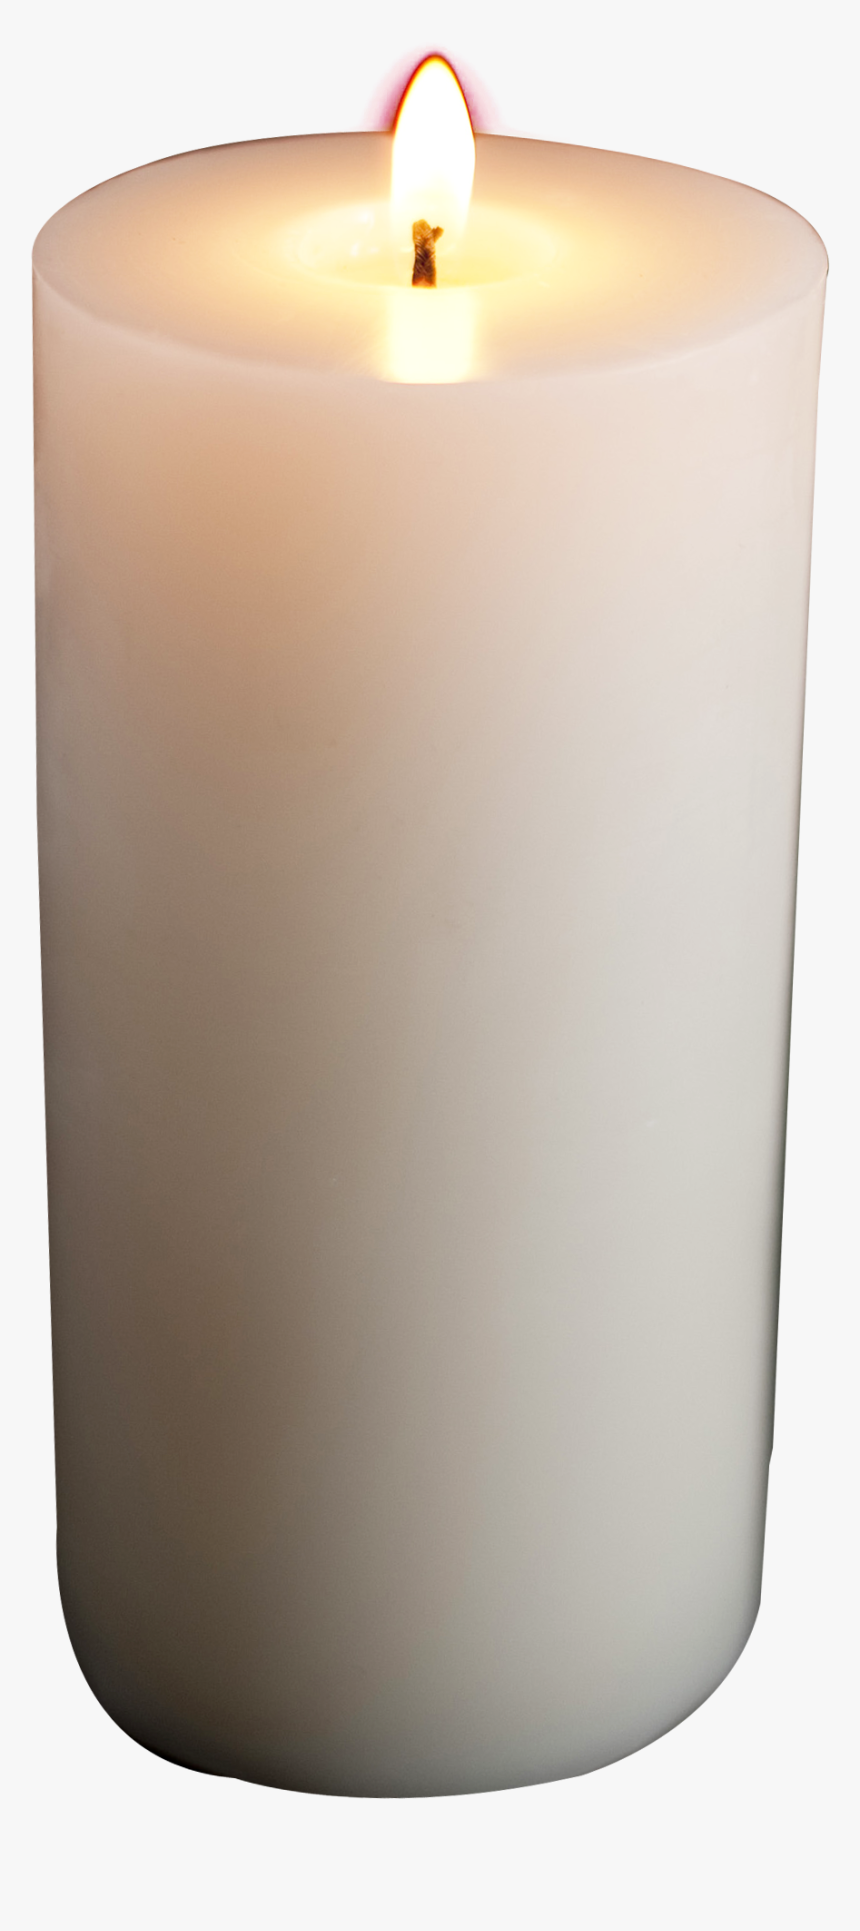 Candle Flame Png - Transparent Background Candles Transparent, Png Download, Free Download